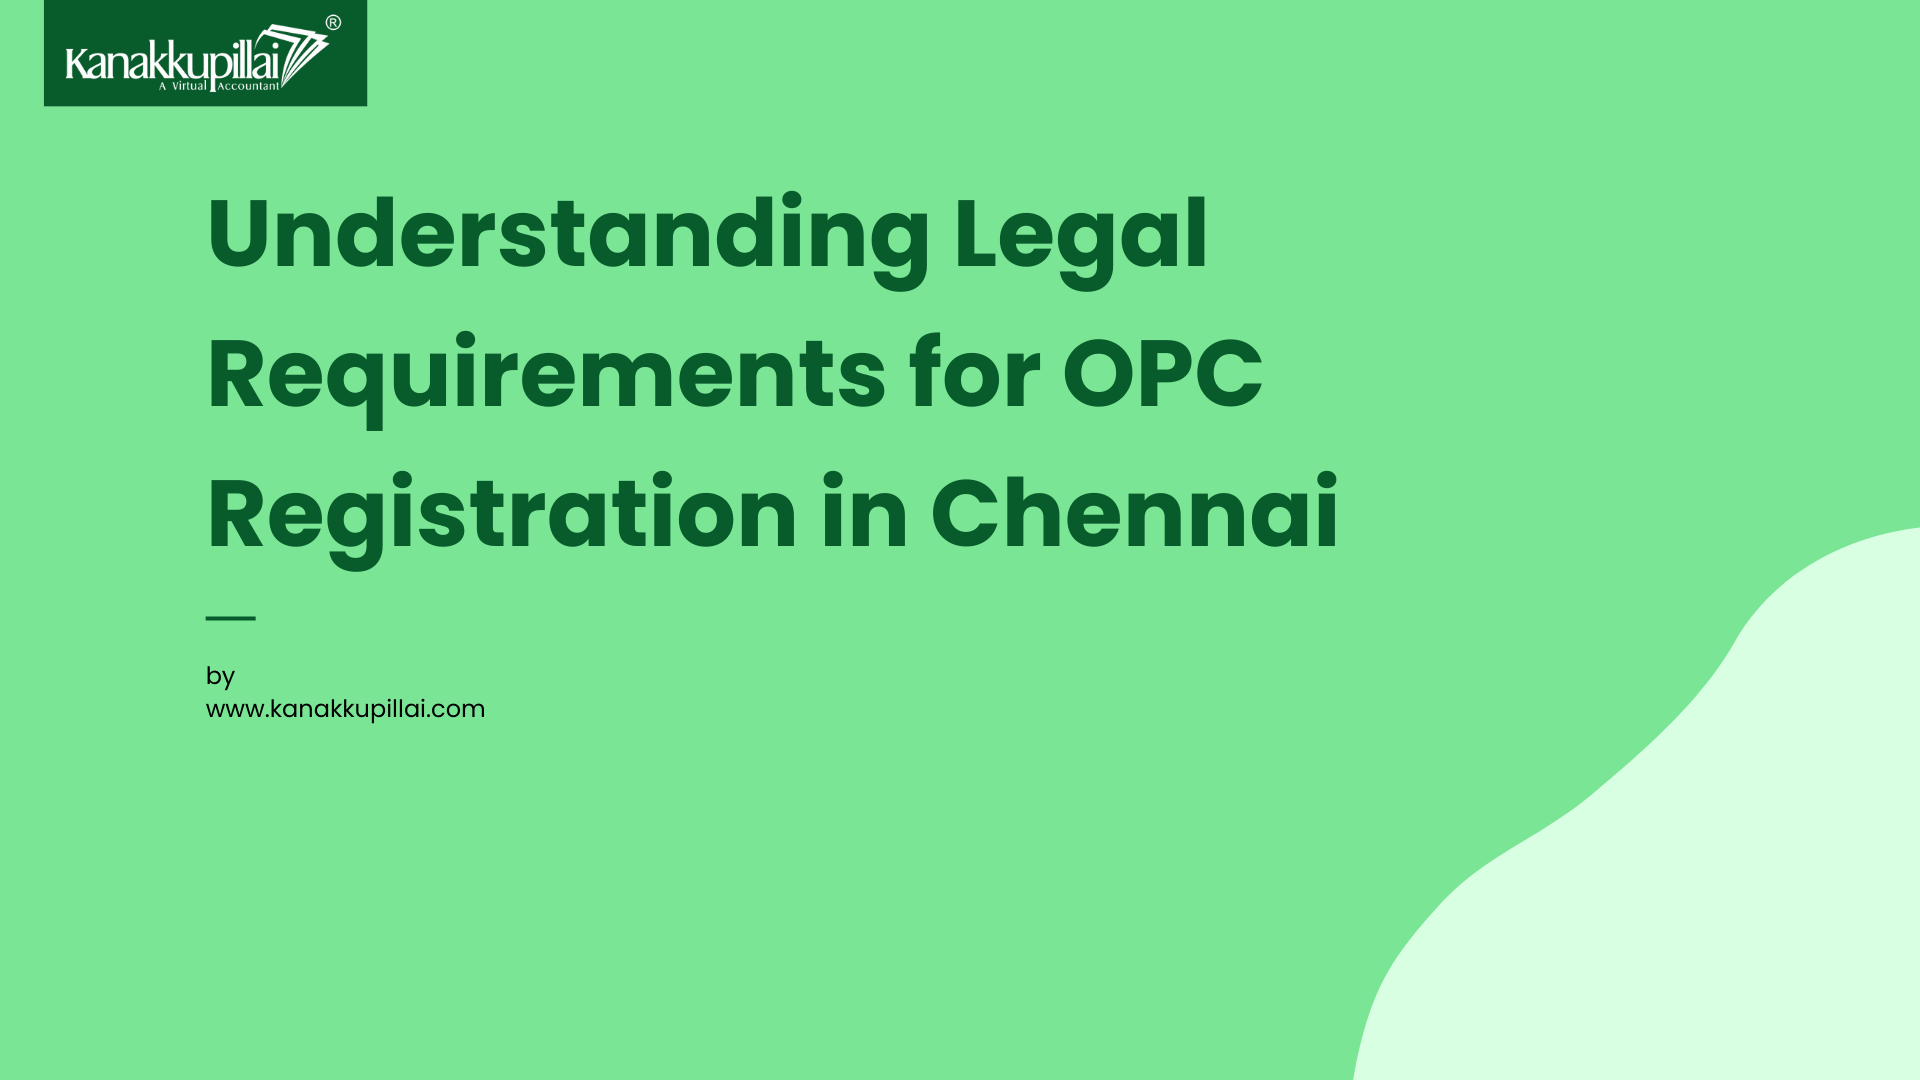 Understanding the Legal Requirements for a One-Person Company Registration in Chennai